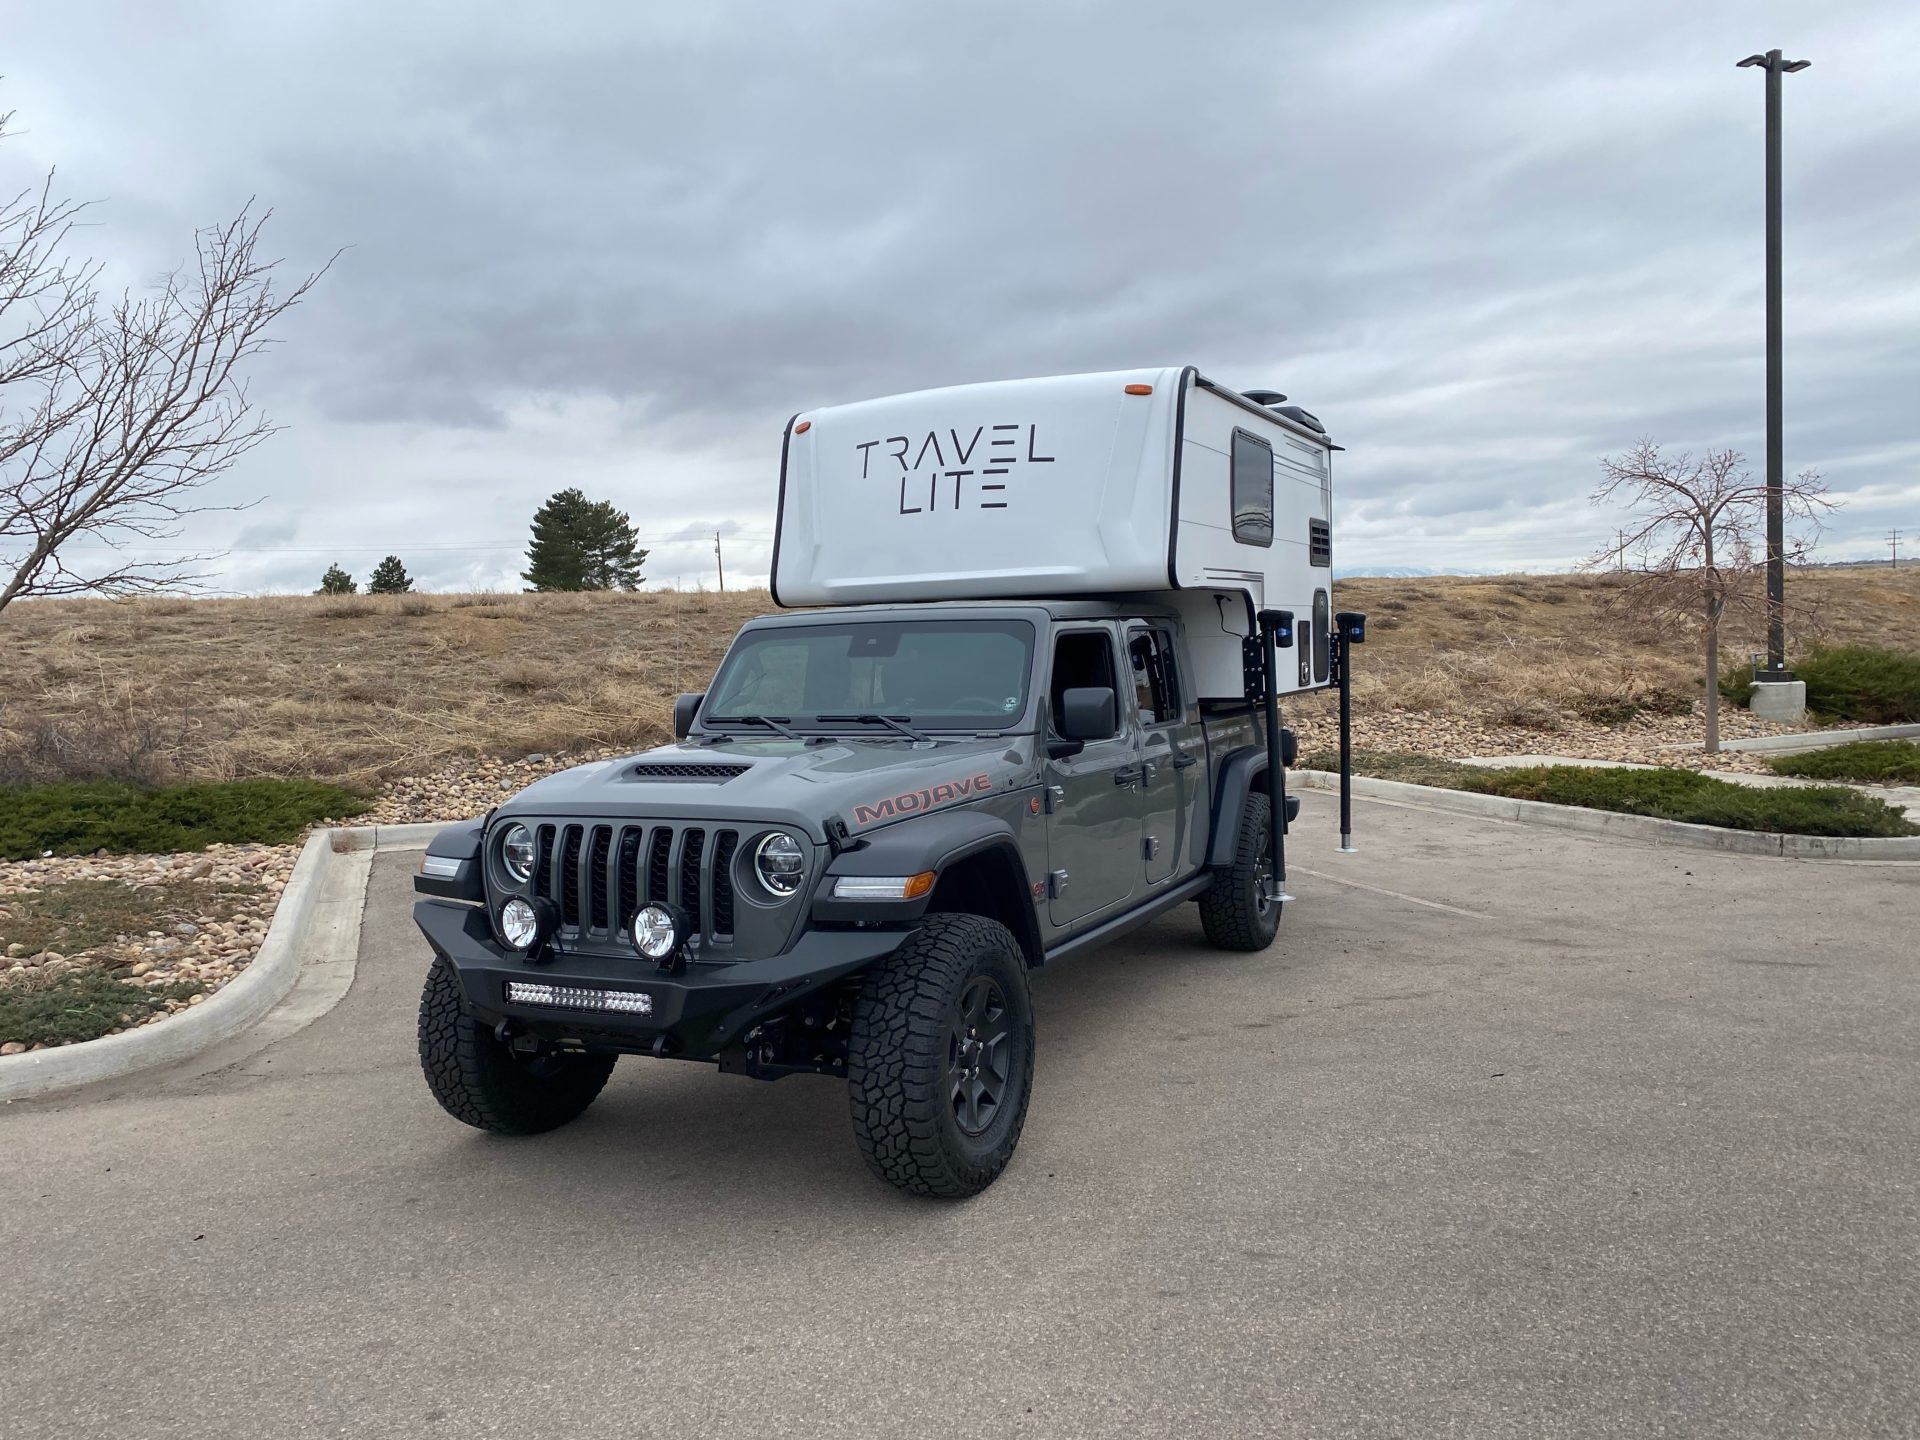 JEEP TRUCK WITH TRAVEL LITE TRUCK CAMPER ON THE BACK